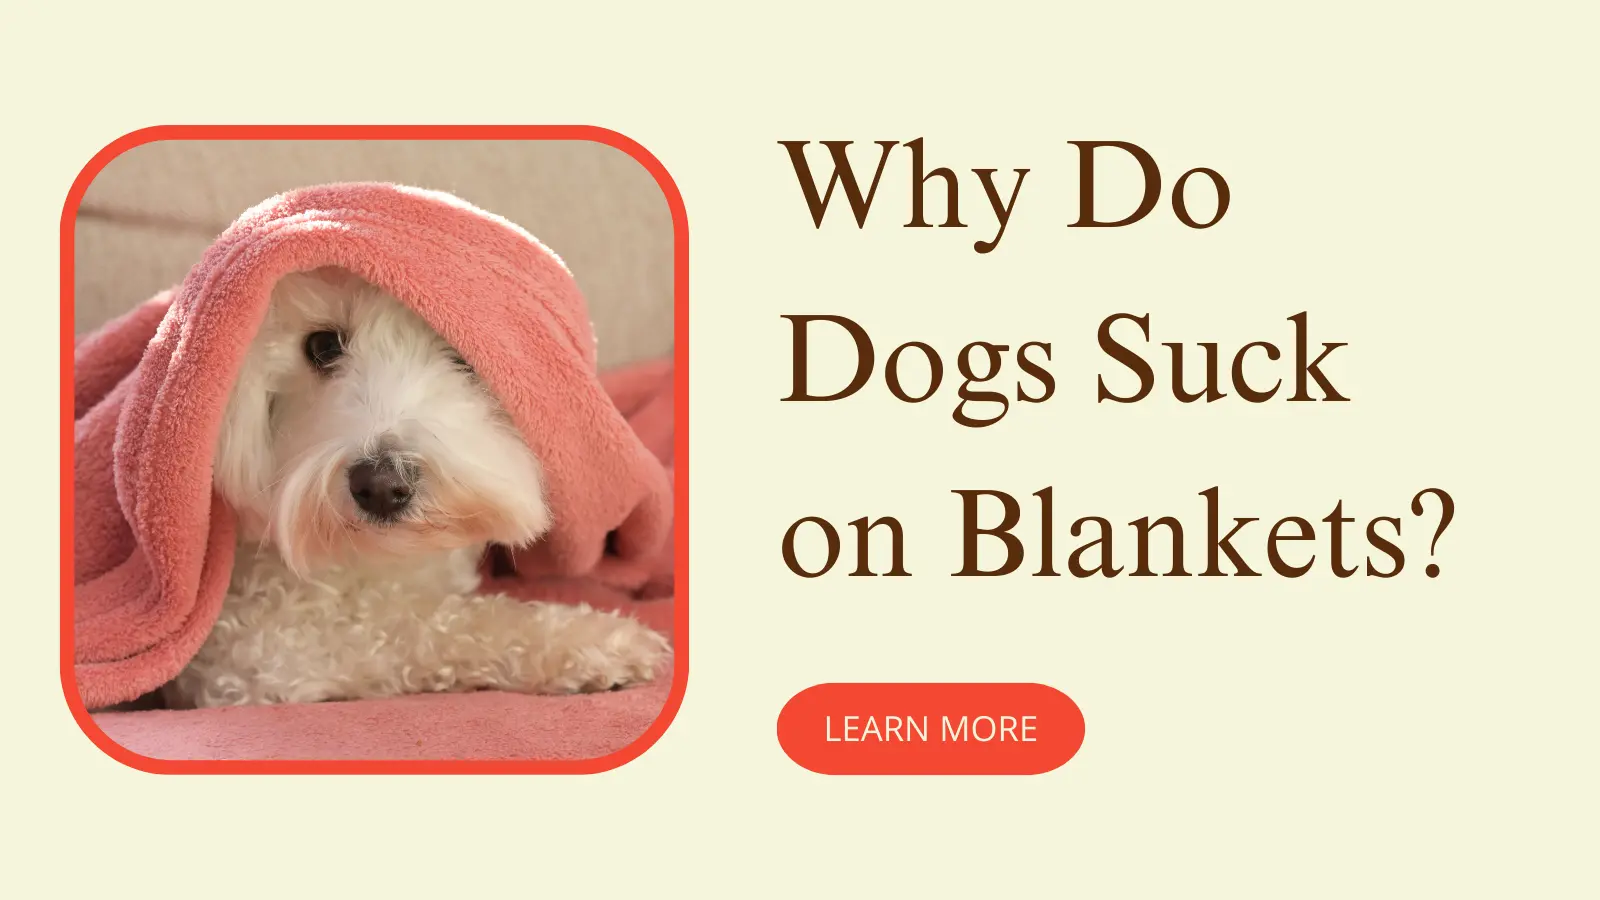 Why Do Dogs Suck on Blankets